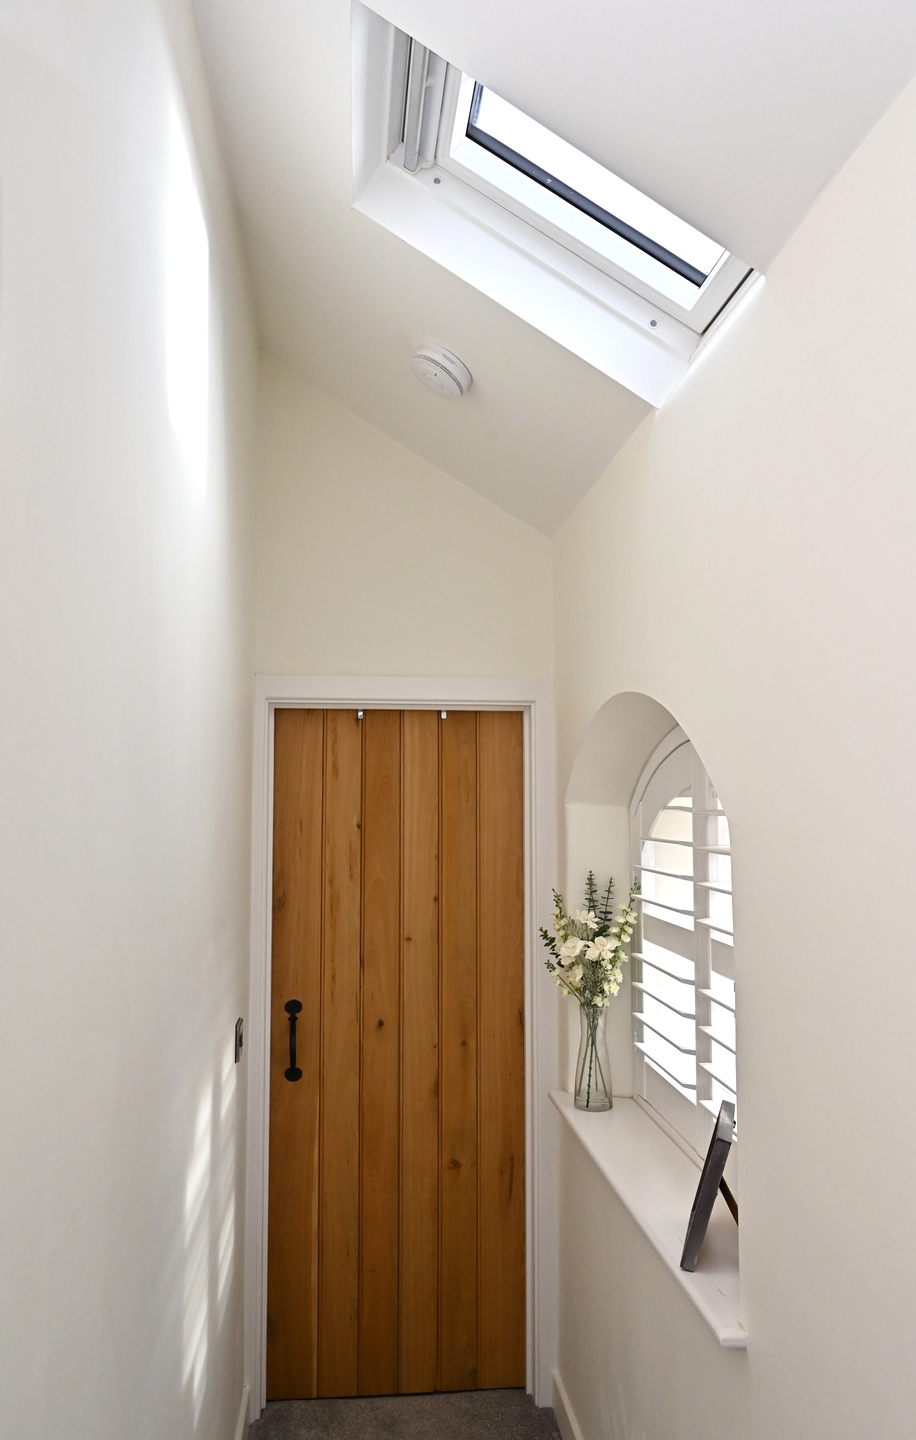 Rooflights in a barn conversion